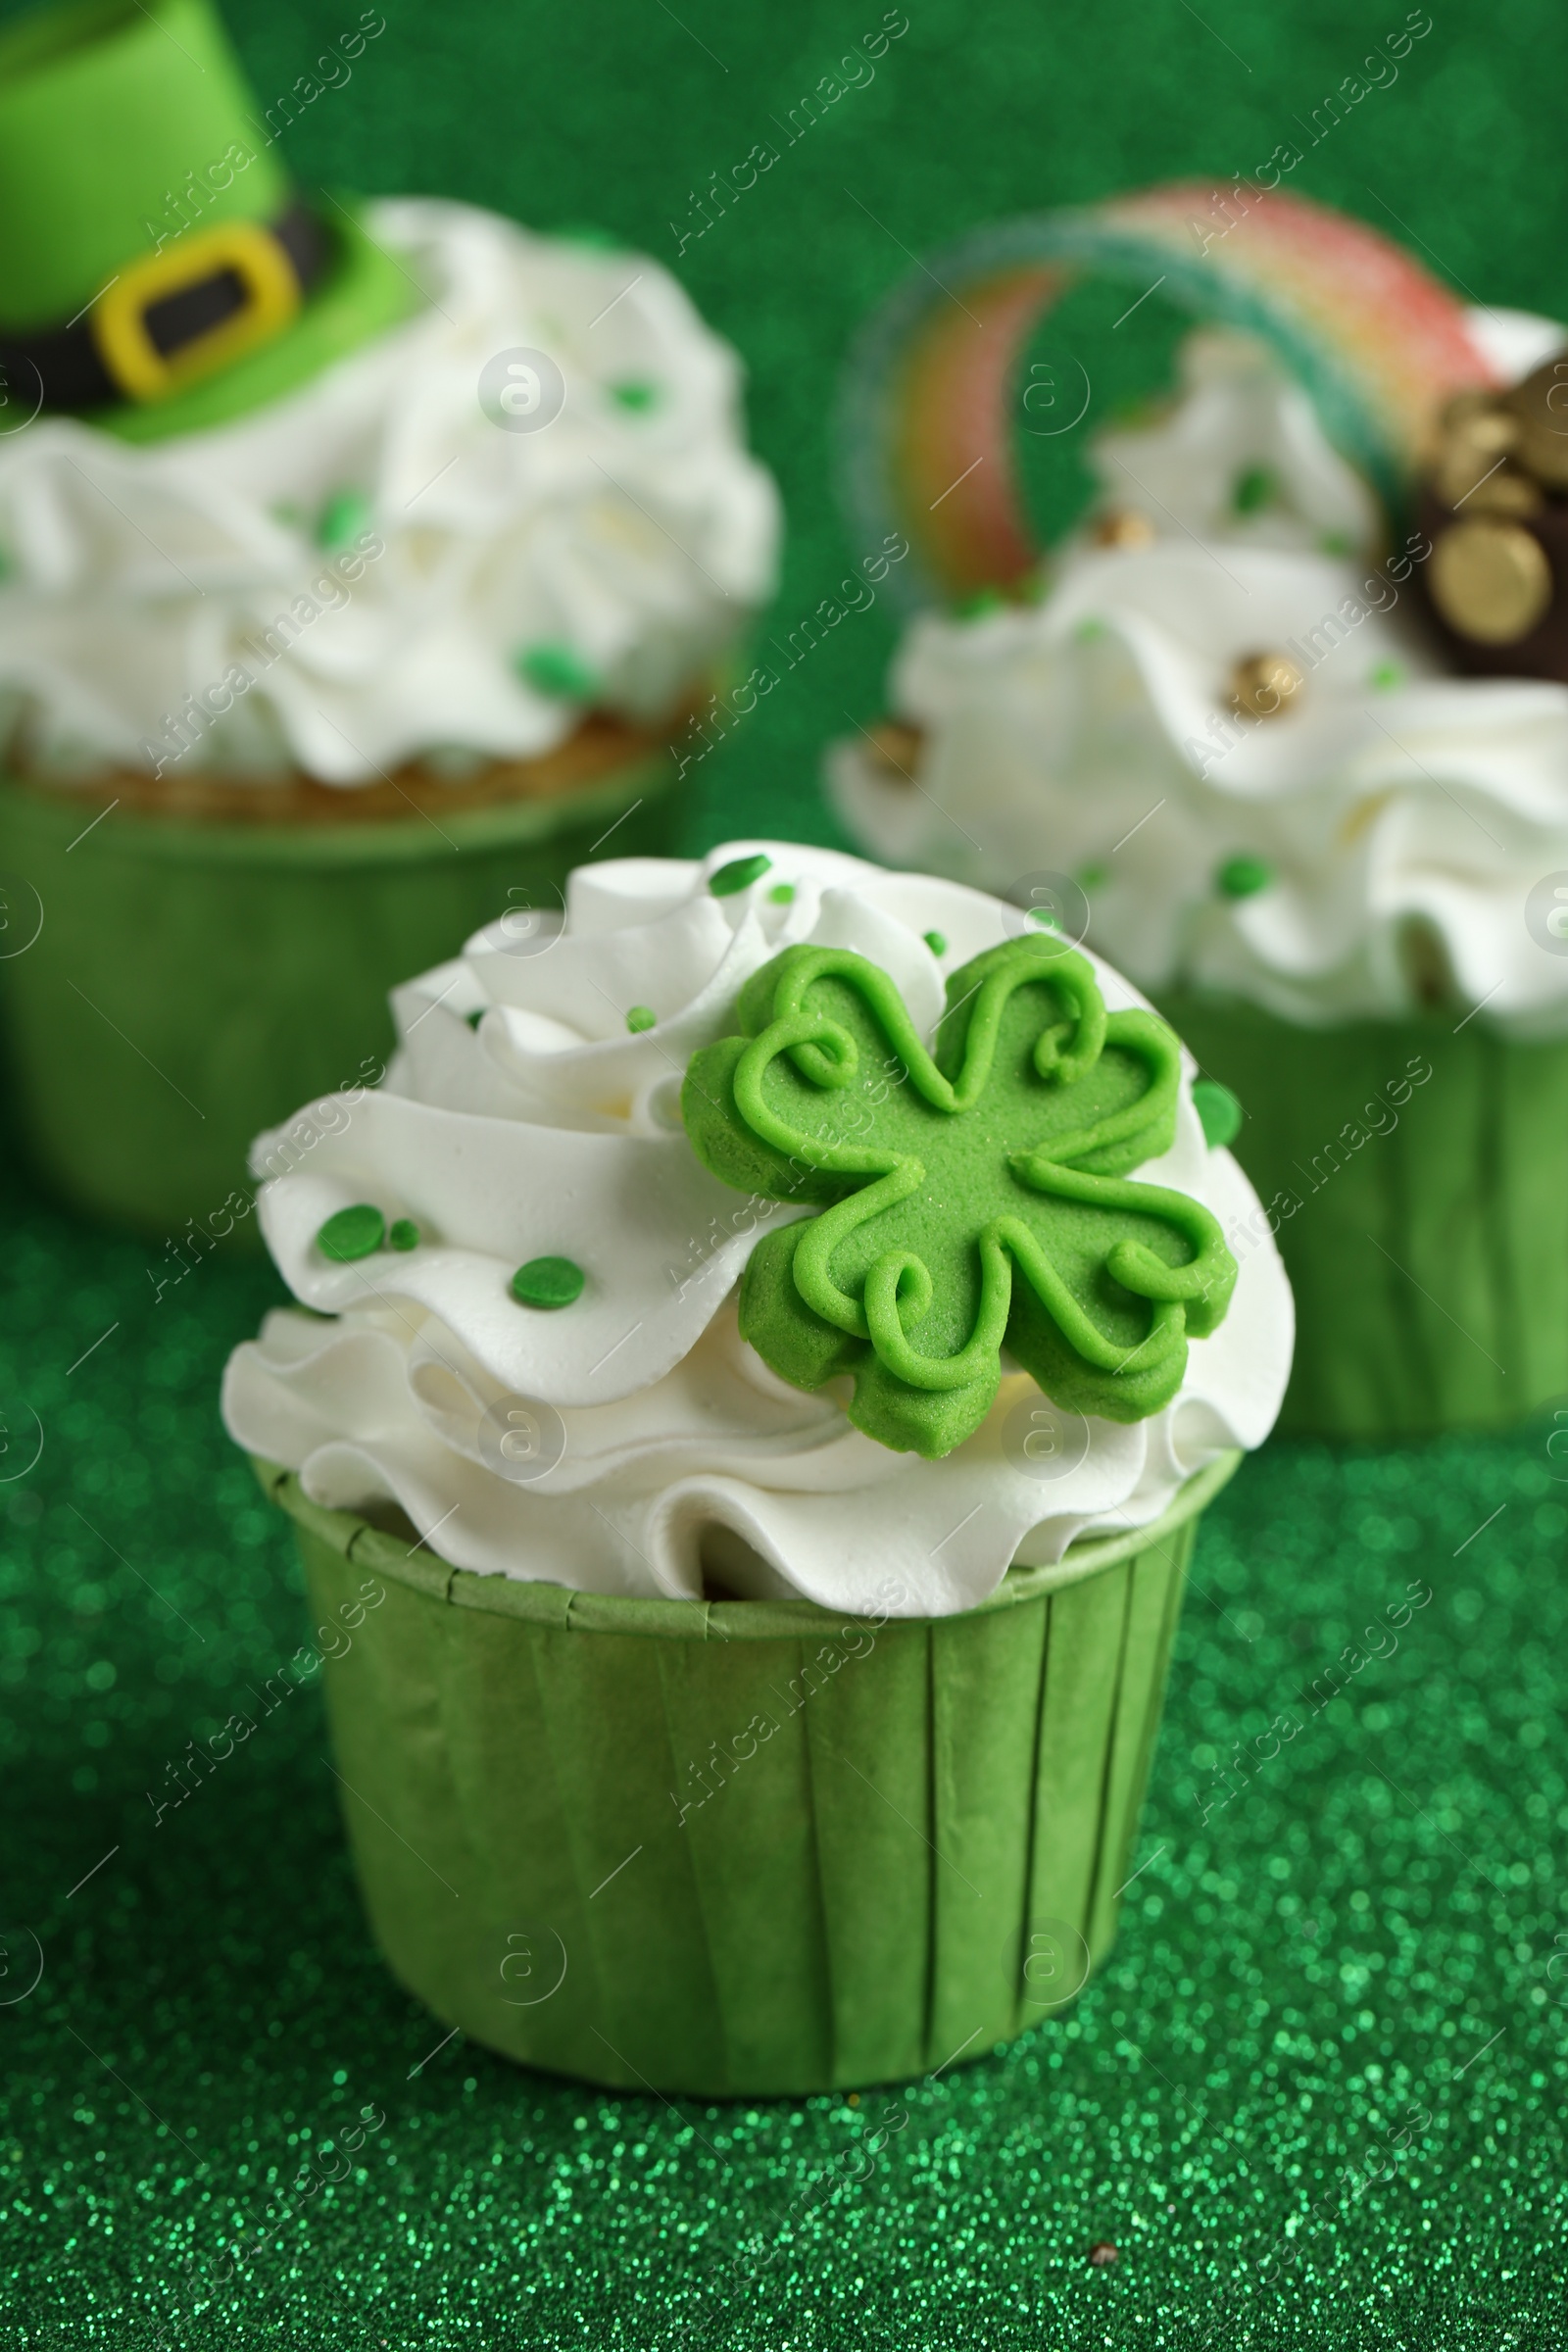 Photo of St. Patrick's day party. Tasty festively decorated cupcakes on shiny green surface, closeup